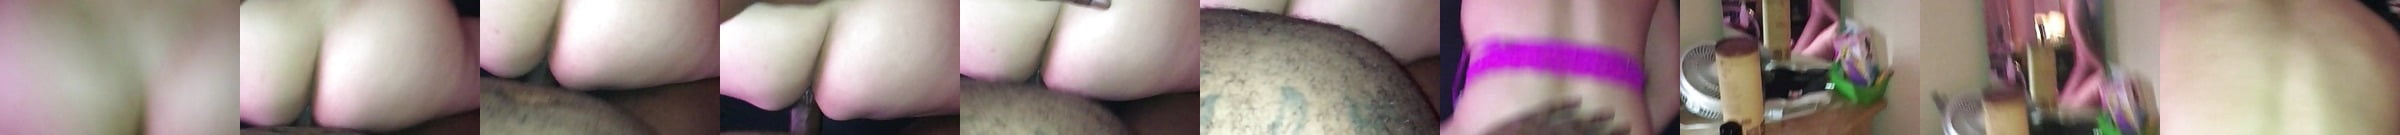 Giving My Tranny This Dick Free Shemale Cock HD Porn 0d XHamster